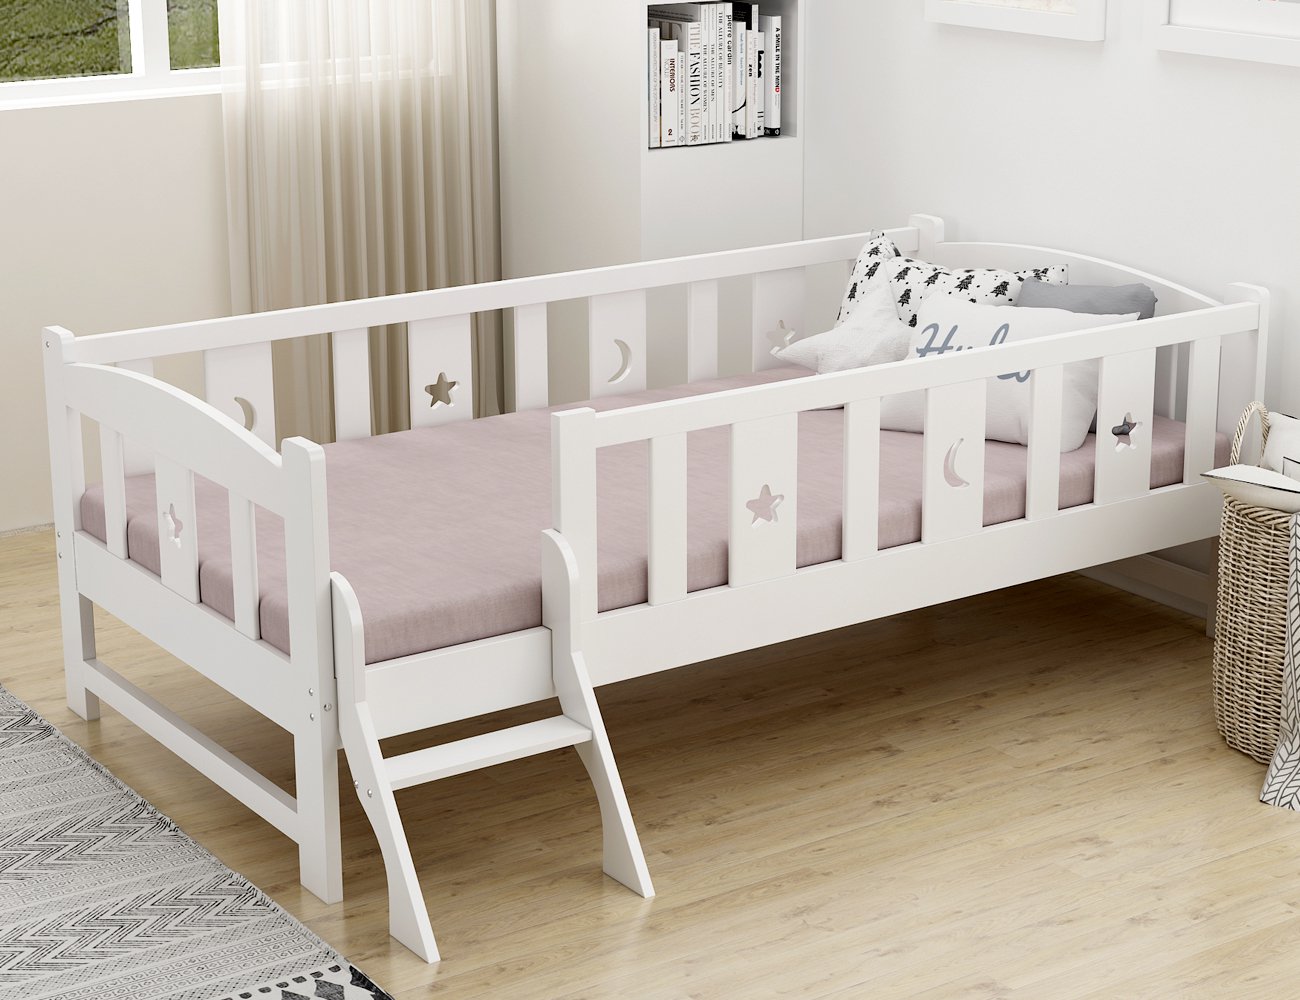 mattresses for childs bed